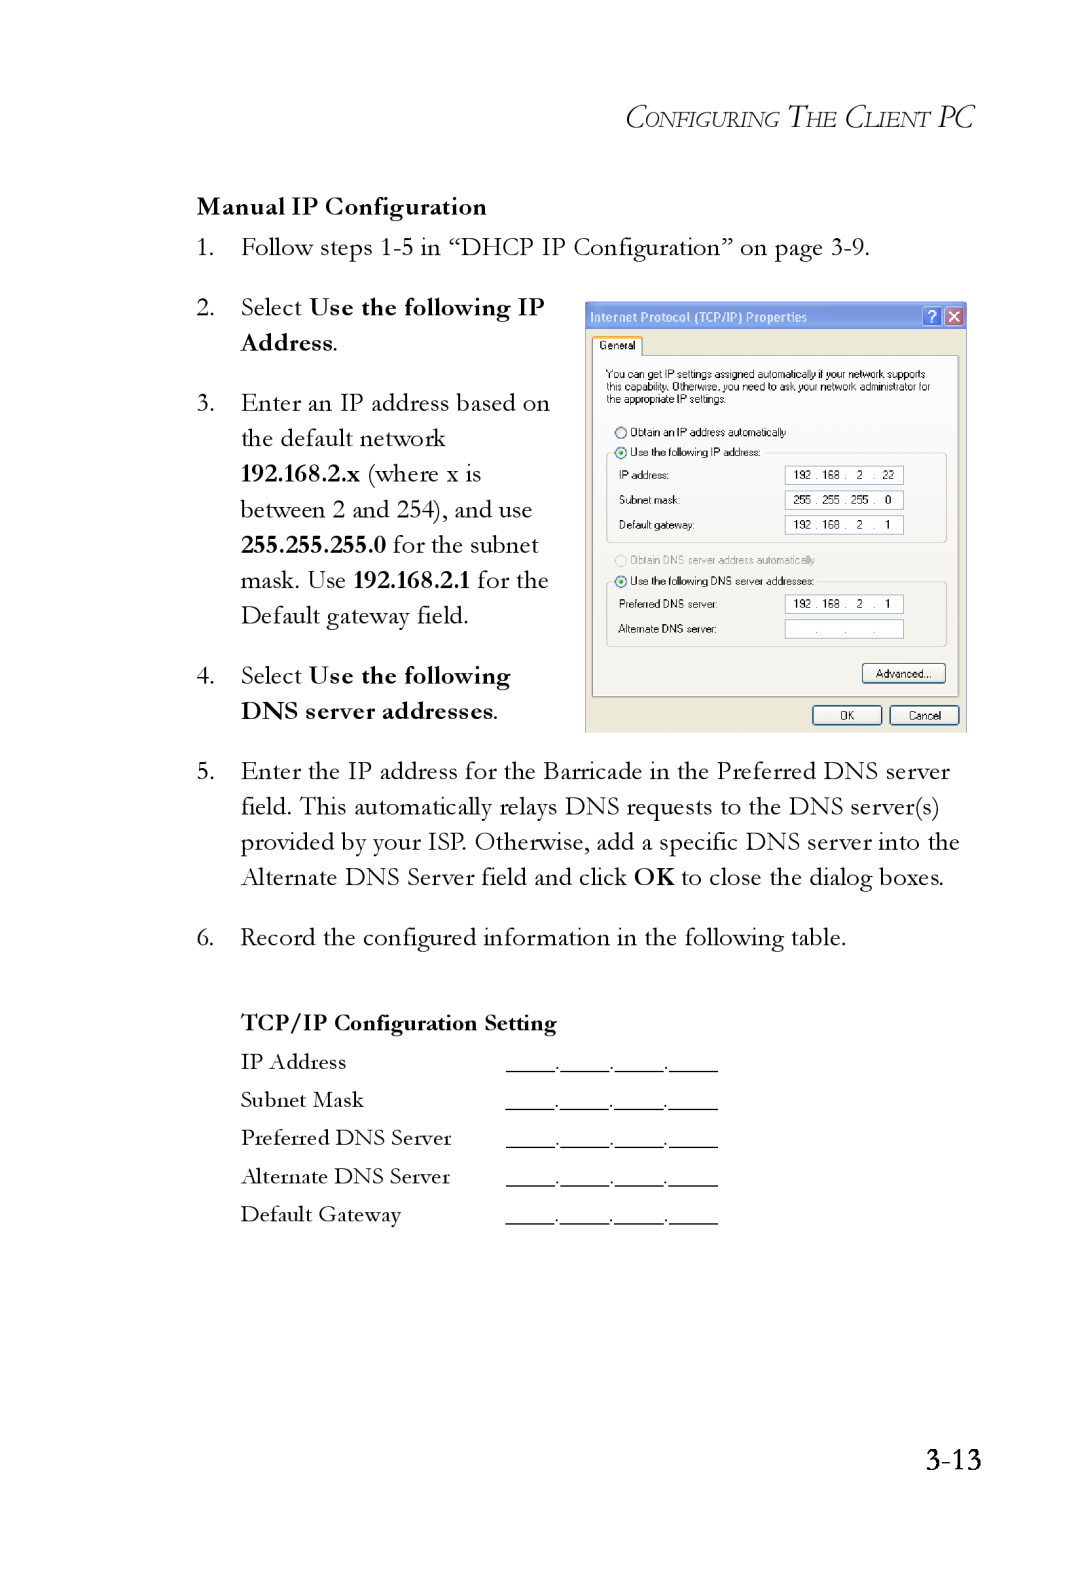 SMC Networks SMCWBR14T-G manual 3-13, Manual IP Configuration, Select Use the following IP Address 